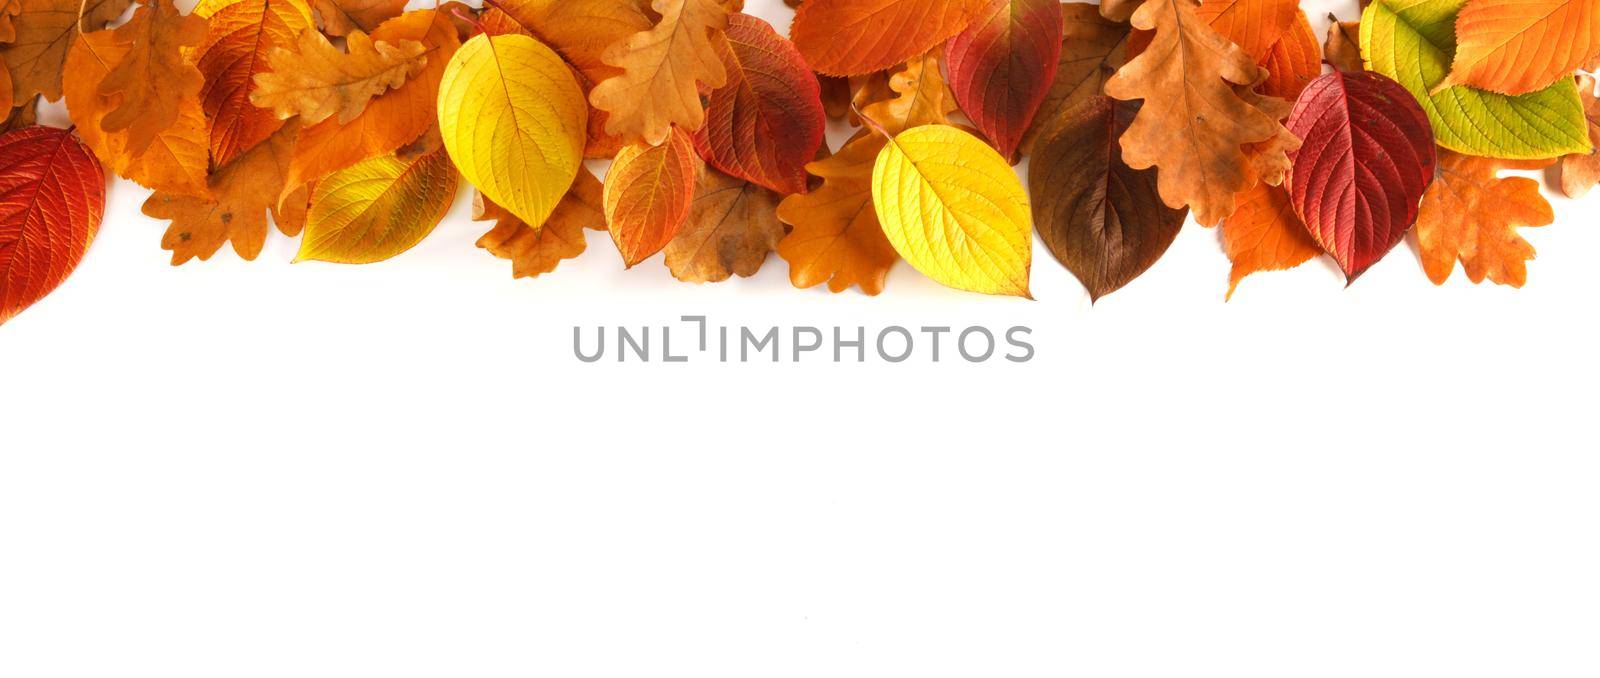 Pattern of colorful autumn leaves border frame design isolated on white background with copy space for text